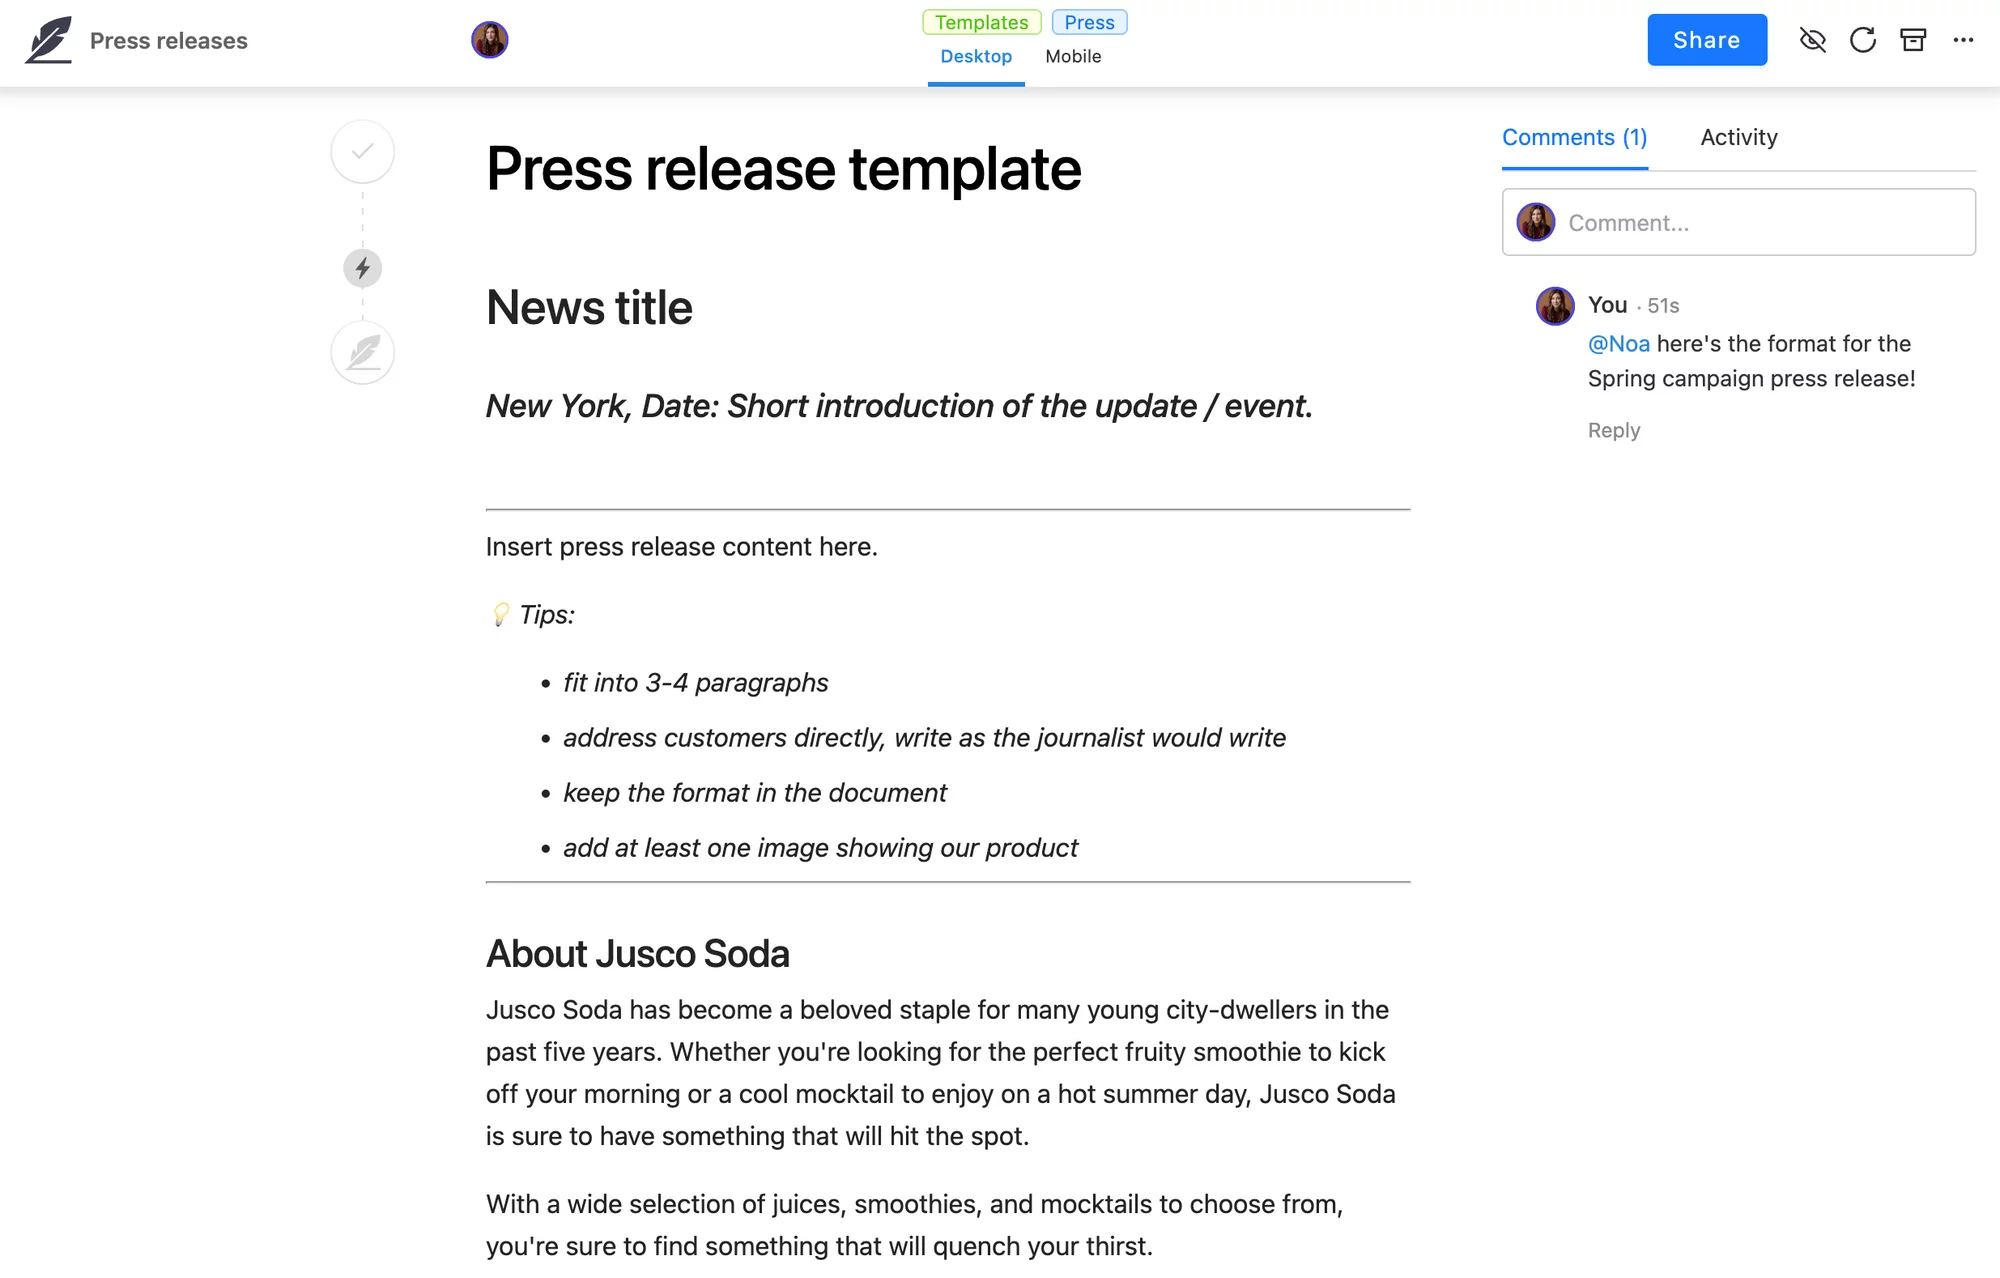 Press release template showing sections like News title, Press release content with writing tips, and About the company.